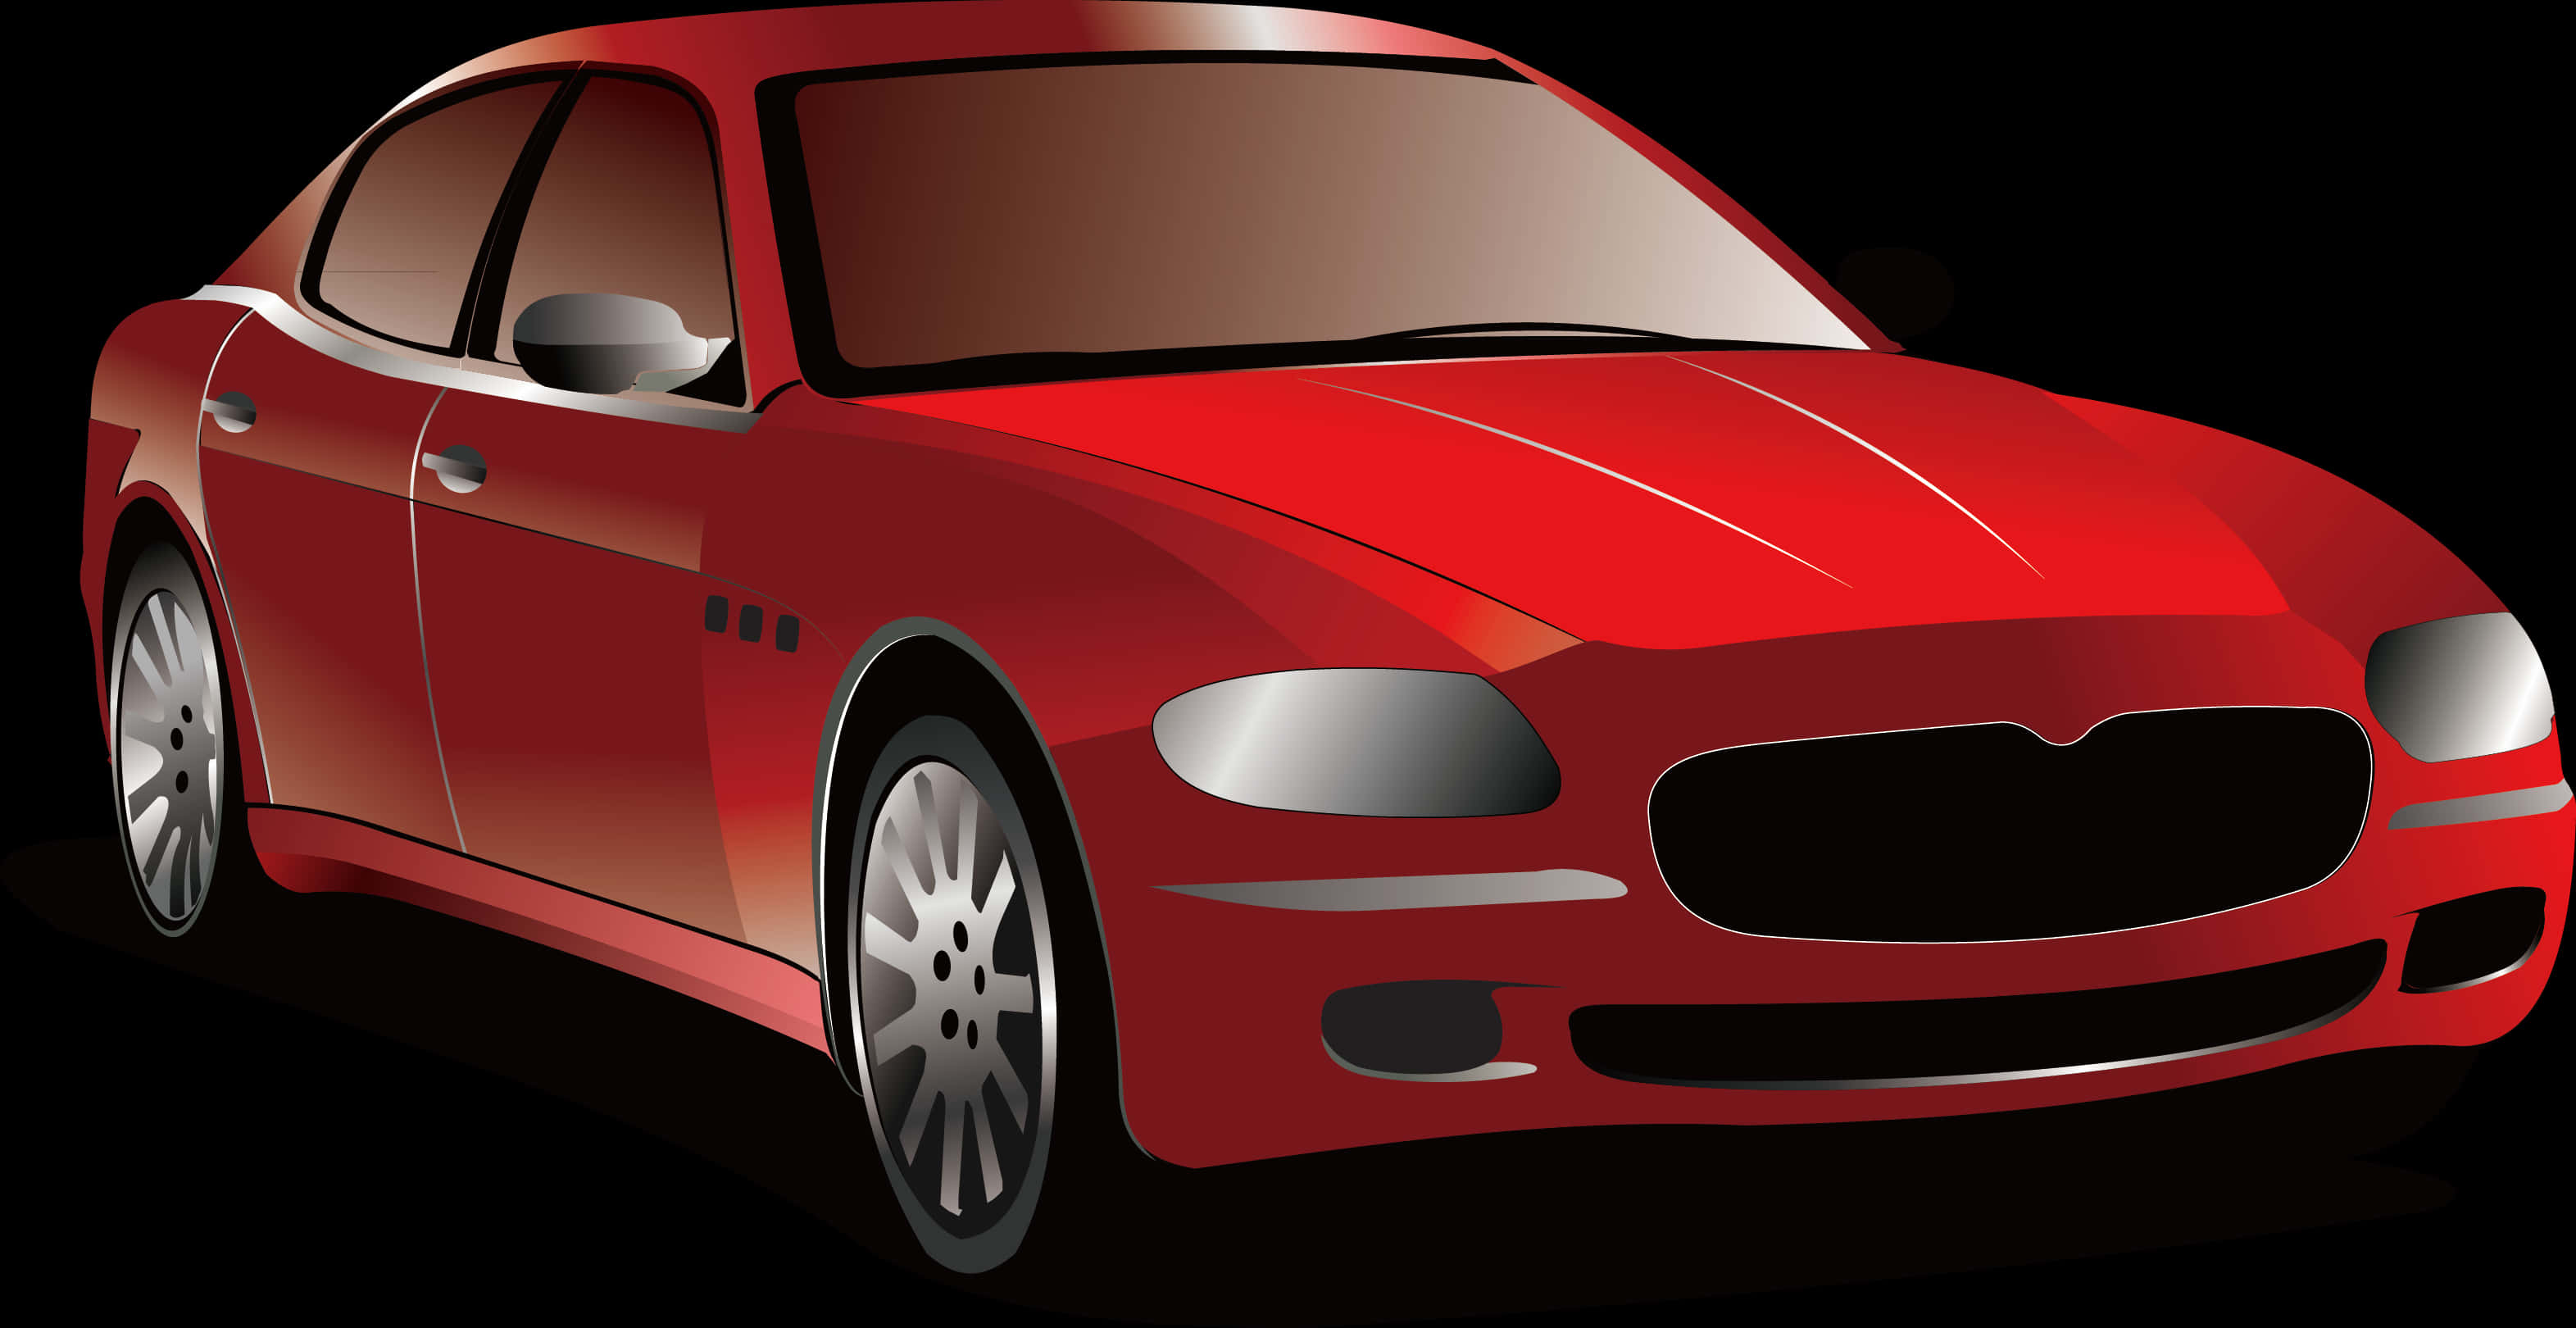 Red Sports Car Vector Illustration PNG